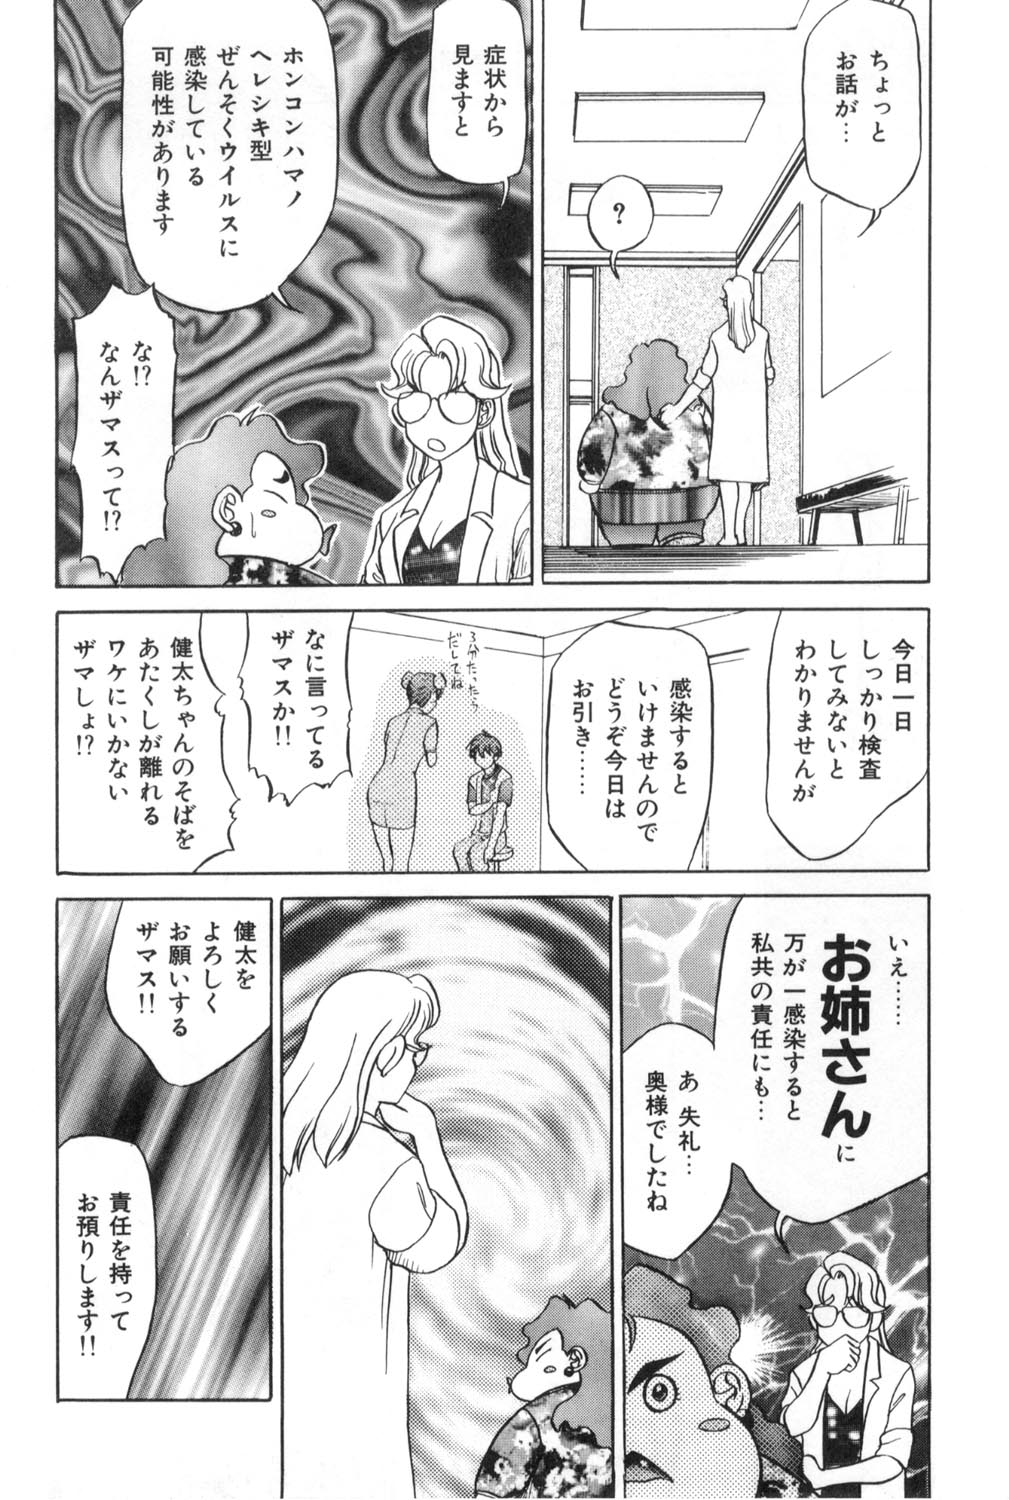 [Koshow Showshow] Oneesan to Issho - It is the same as the older sister. page 42 full